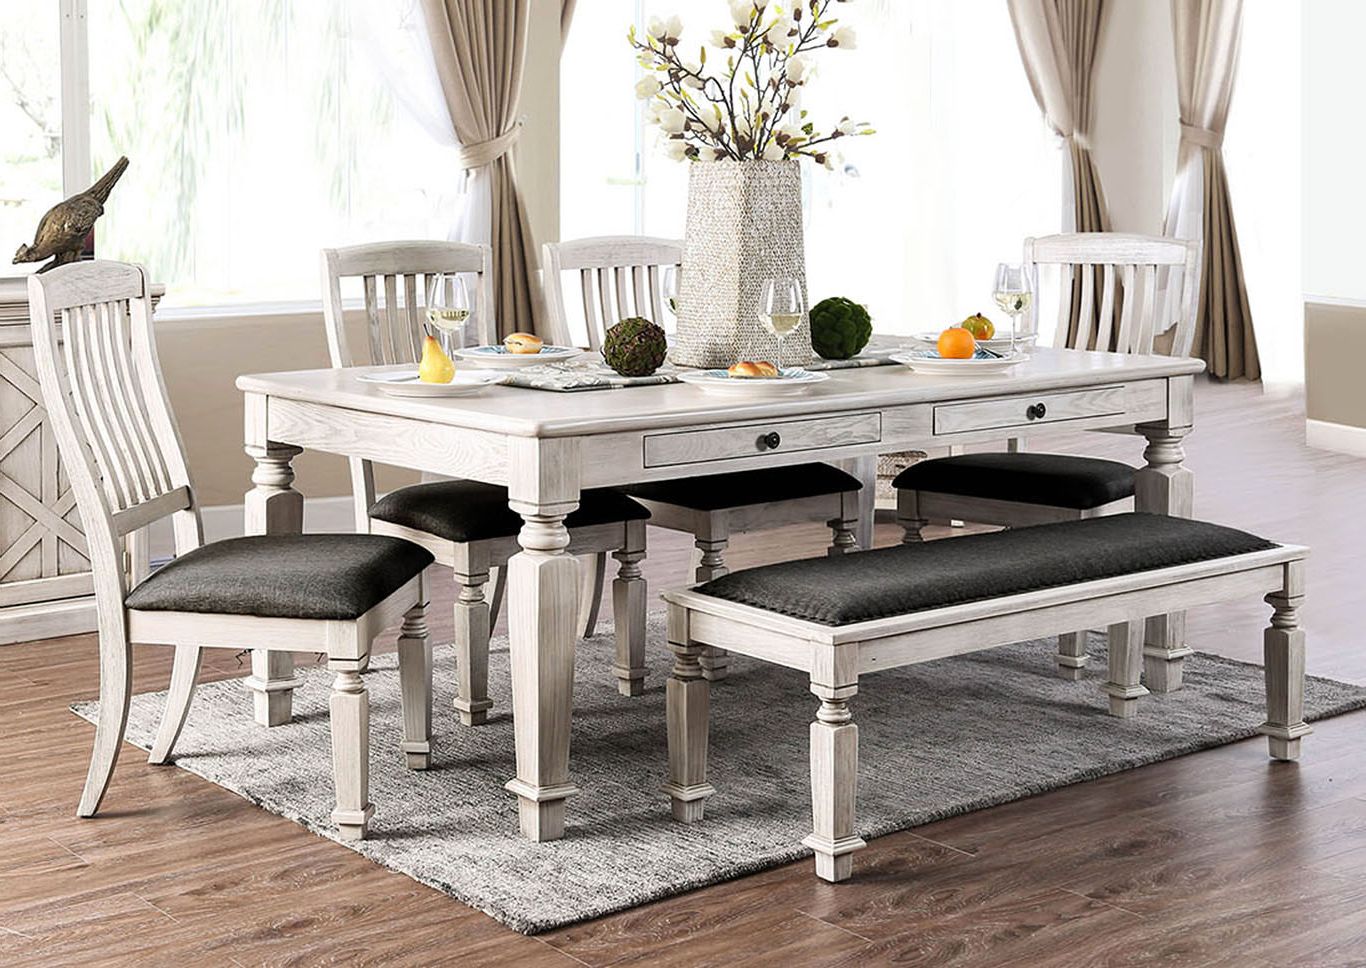 Well Known 30s Kitchen Table For 4 – Aubrie S Home Furnishing And Decor Intended For Antique Black Wood Kitchen Dining Tables (View 19 of 30)